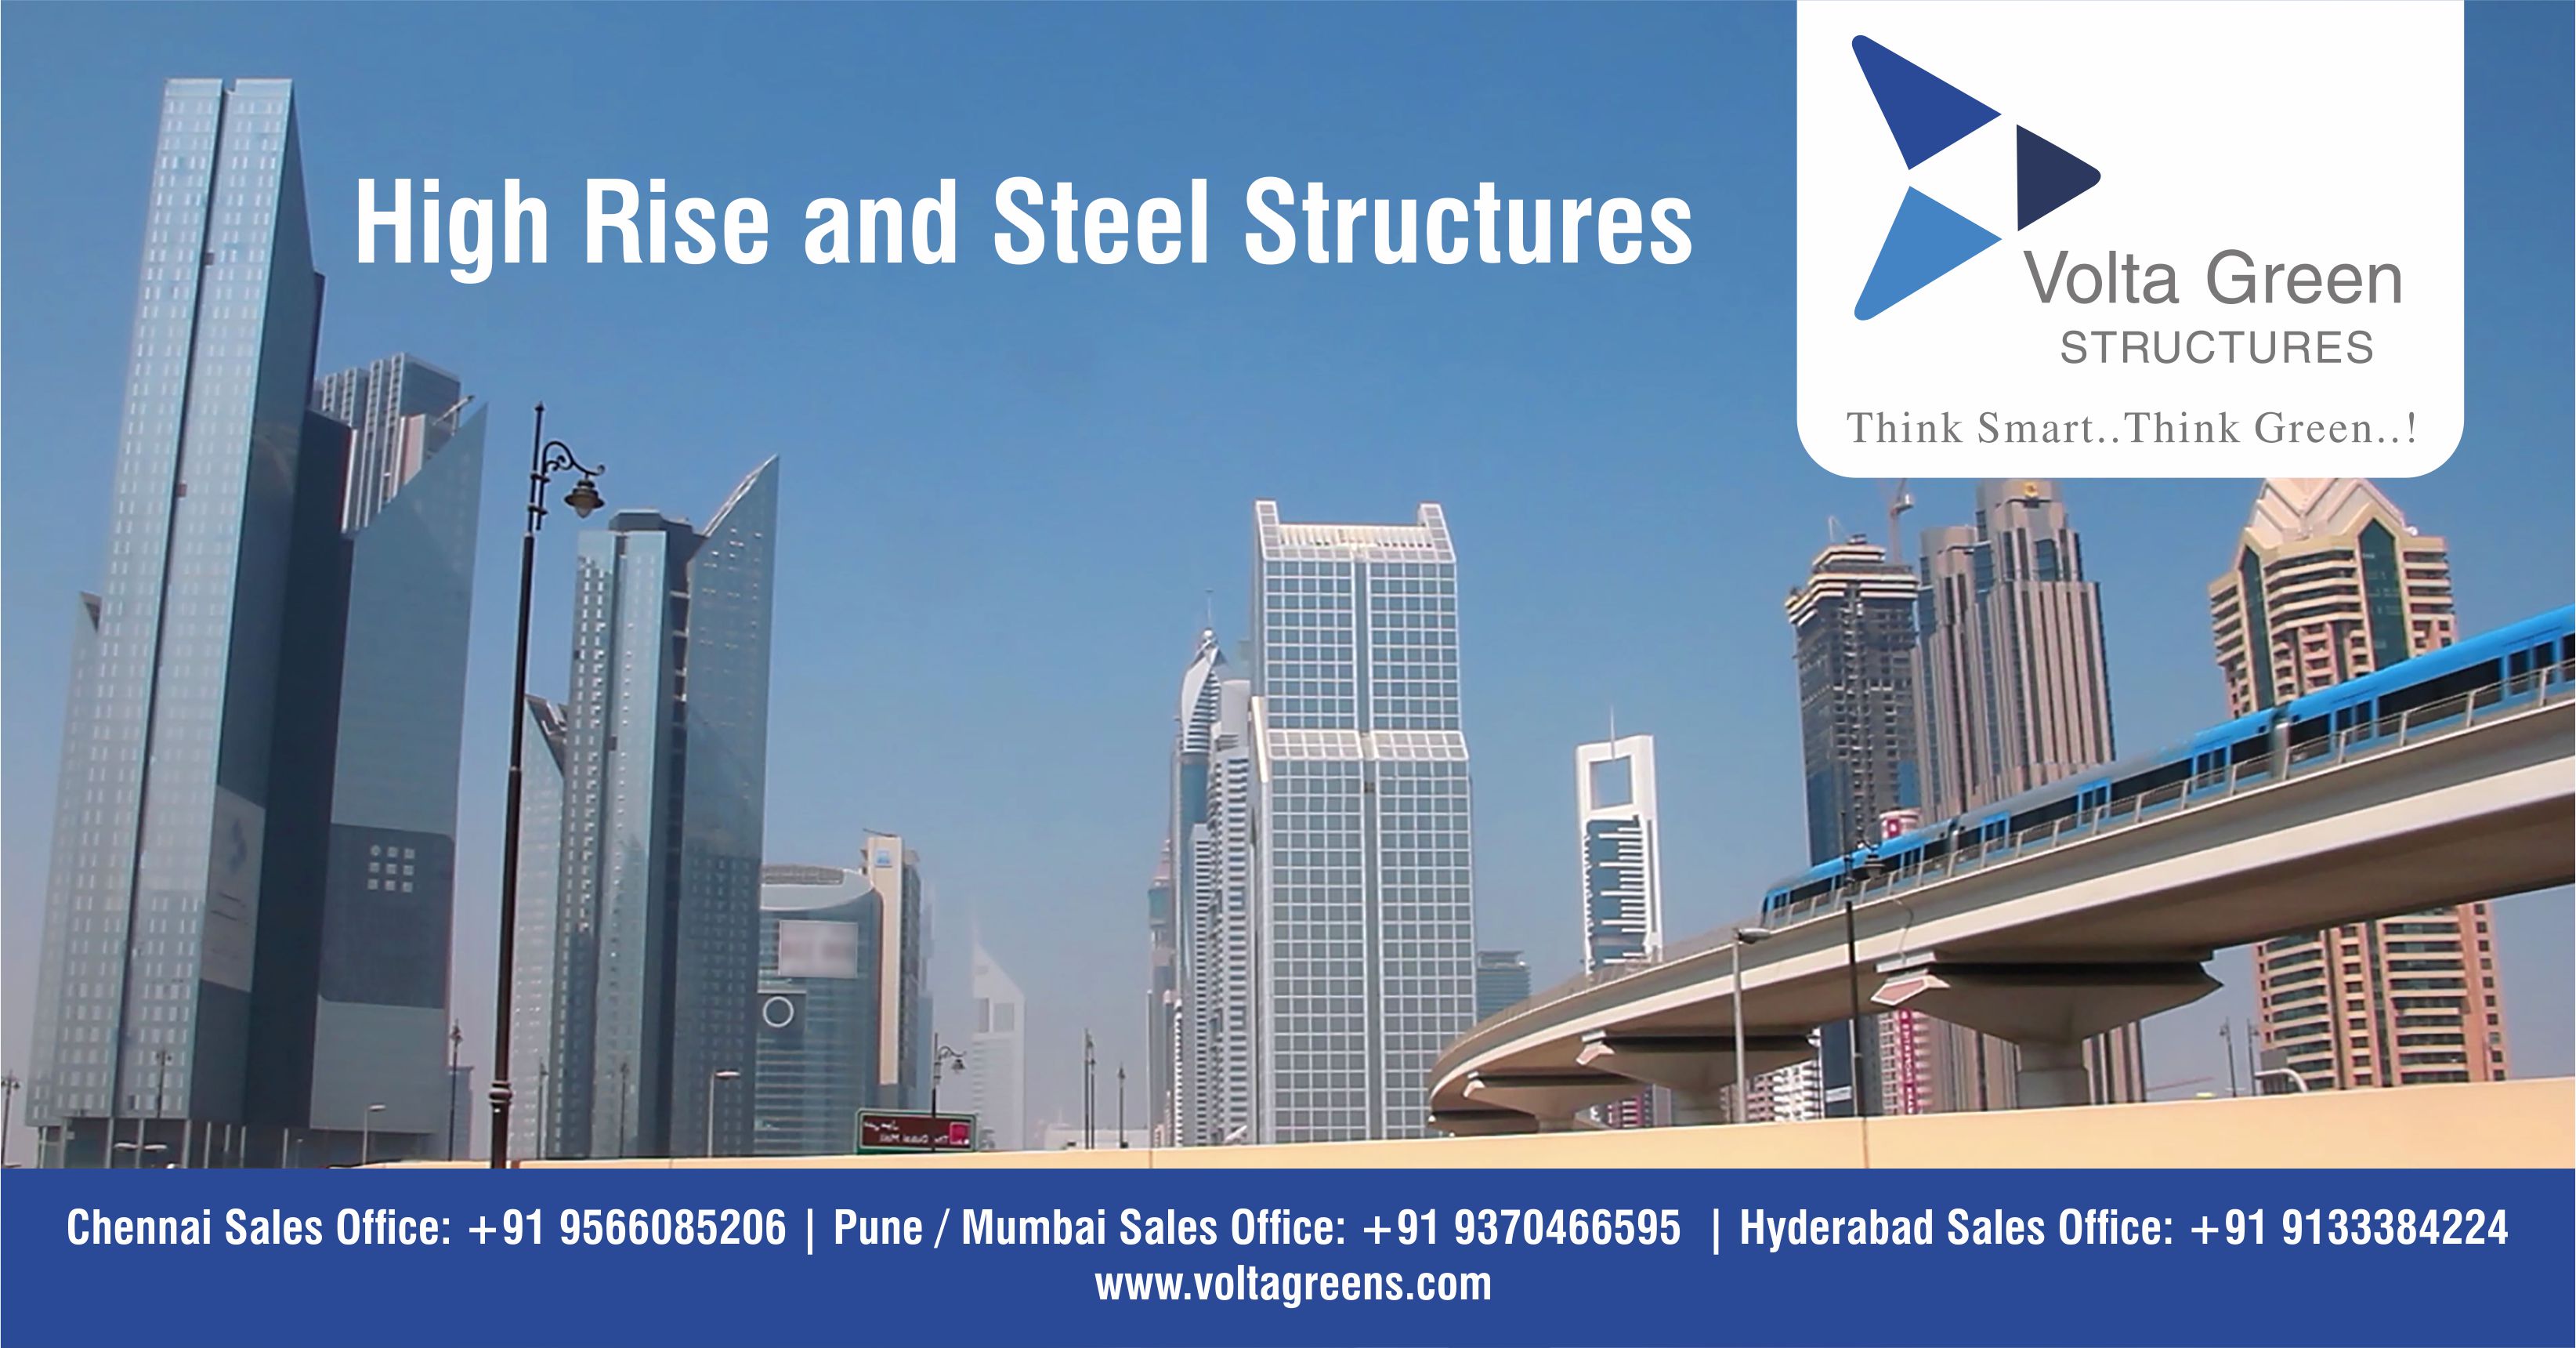 High Rise and Steel Structures